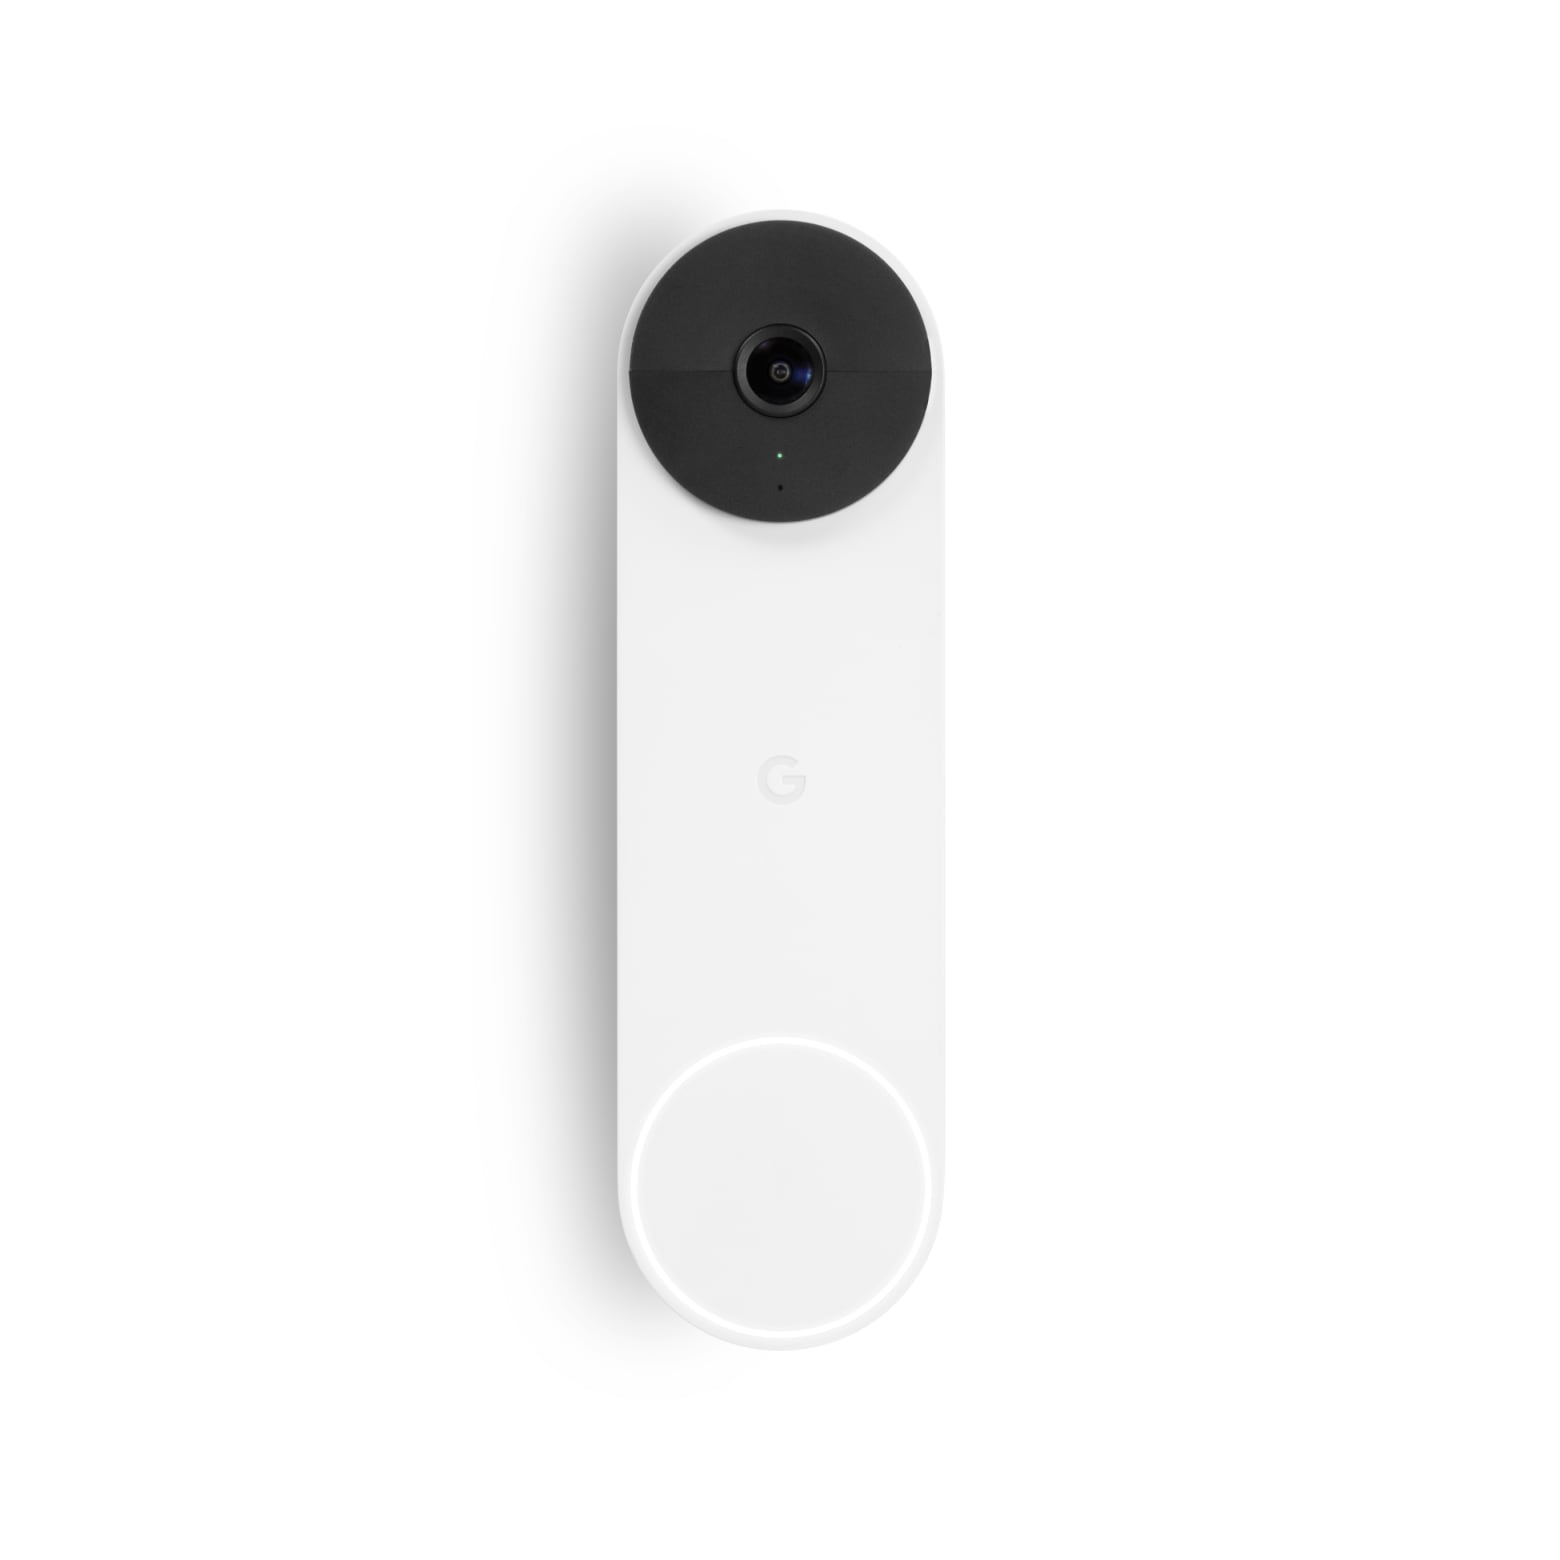 Home Security With the New Nest Cams and Doorbell From Google